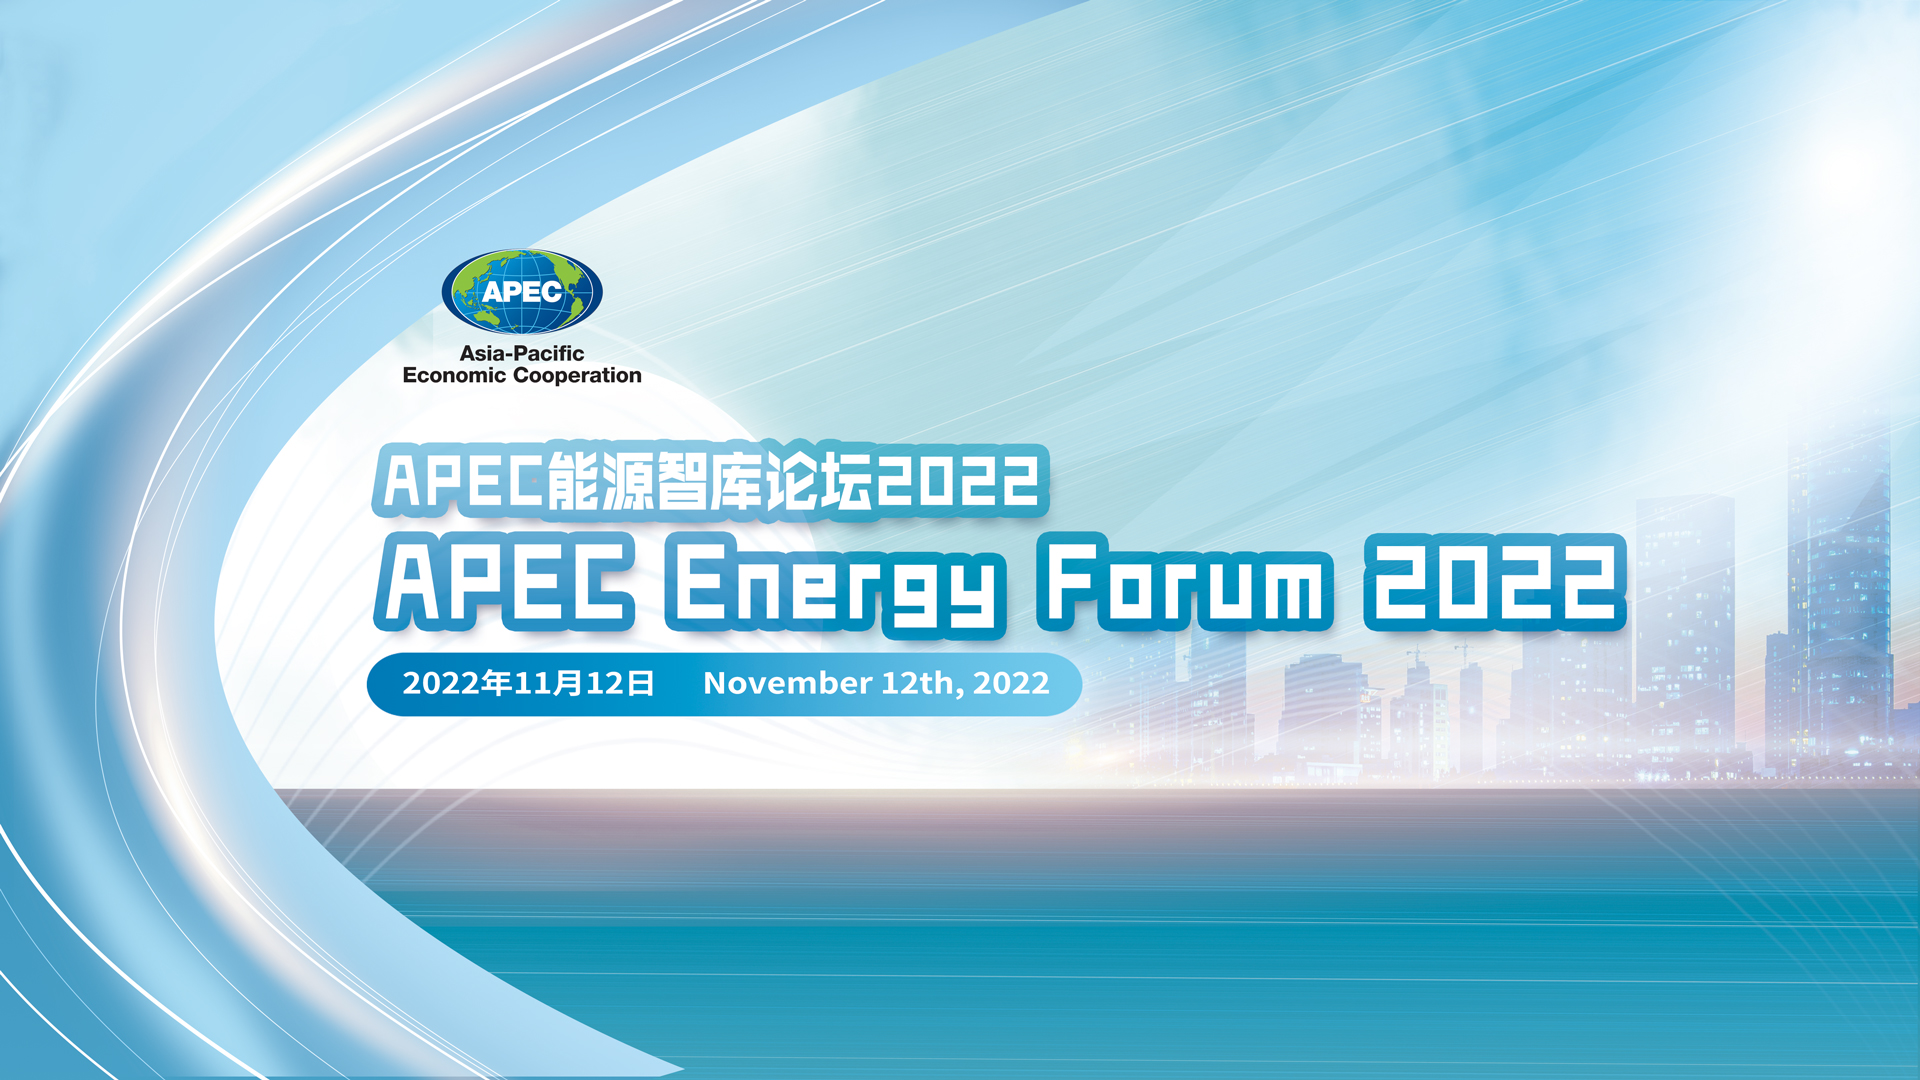 Live: APEC Energy Forum 2022 on trends in energy transformation 